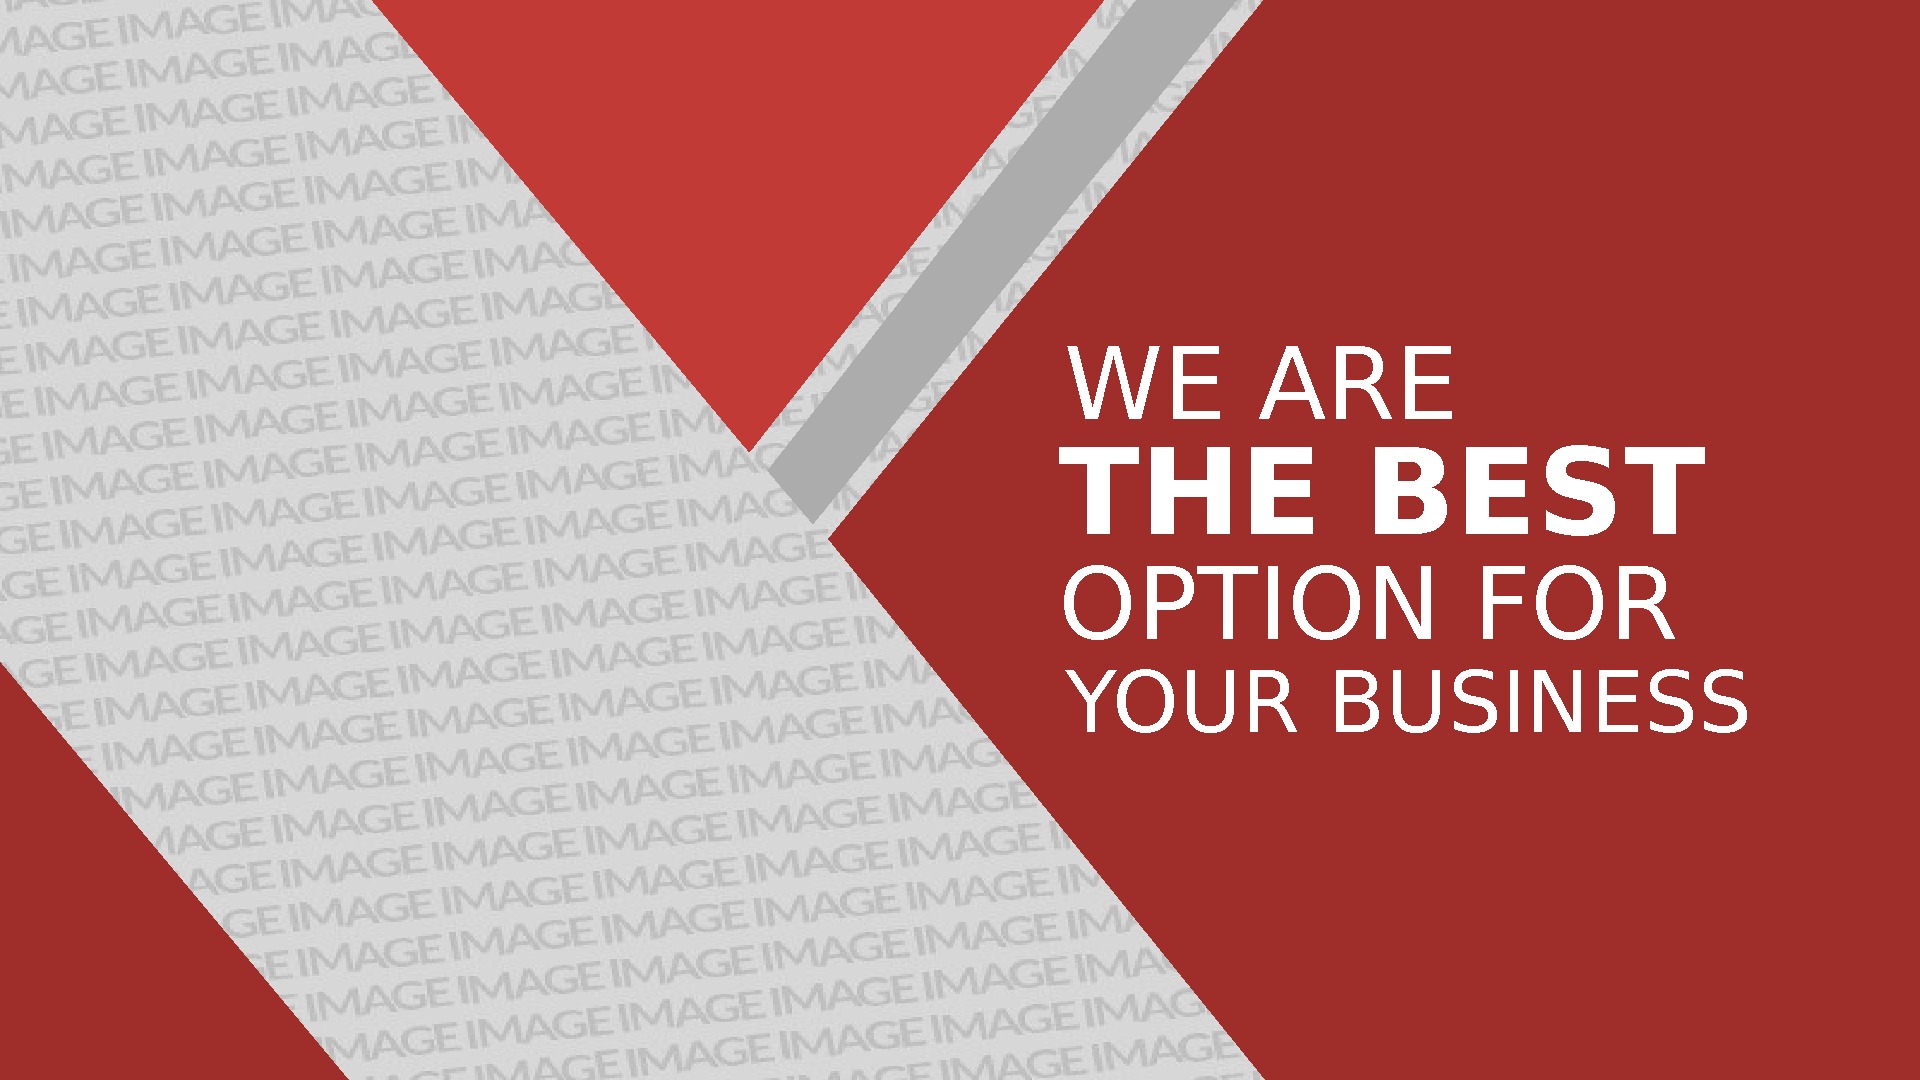 WE ARE THE BEST OPTION FOR YOUR BUSINESS 